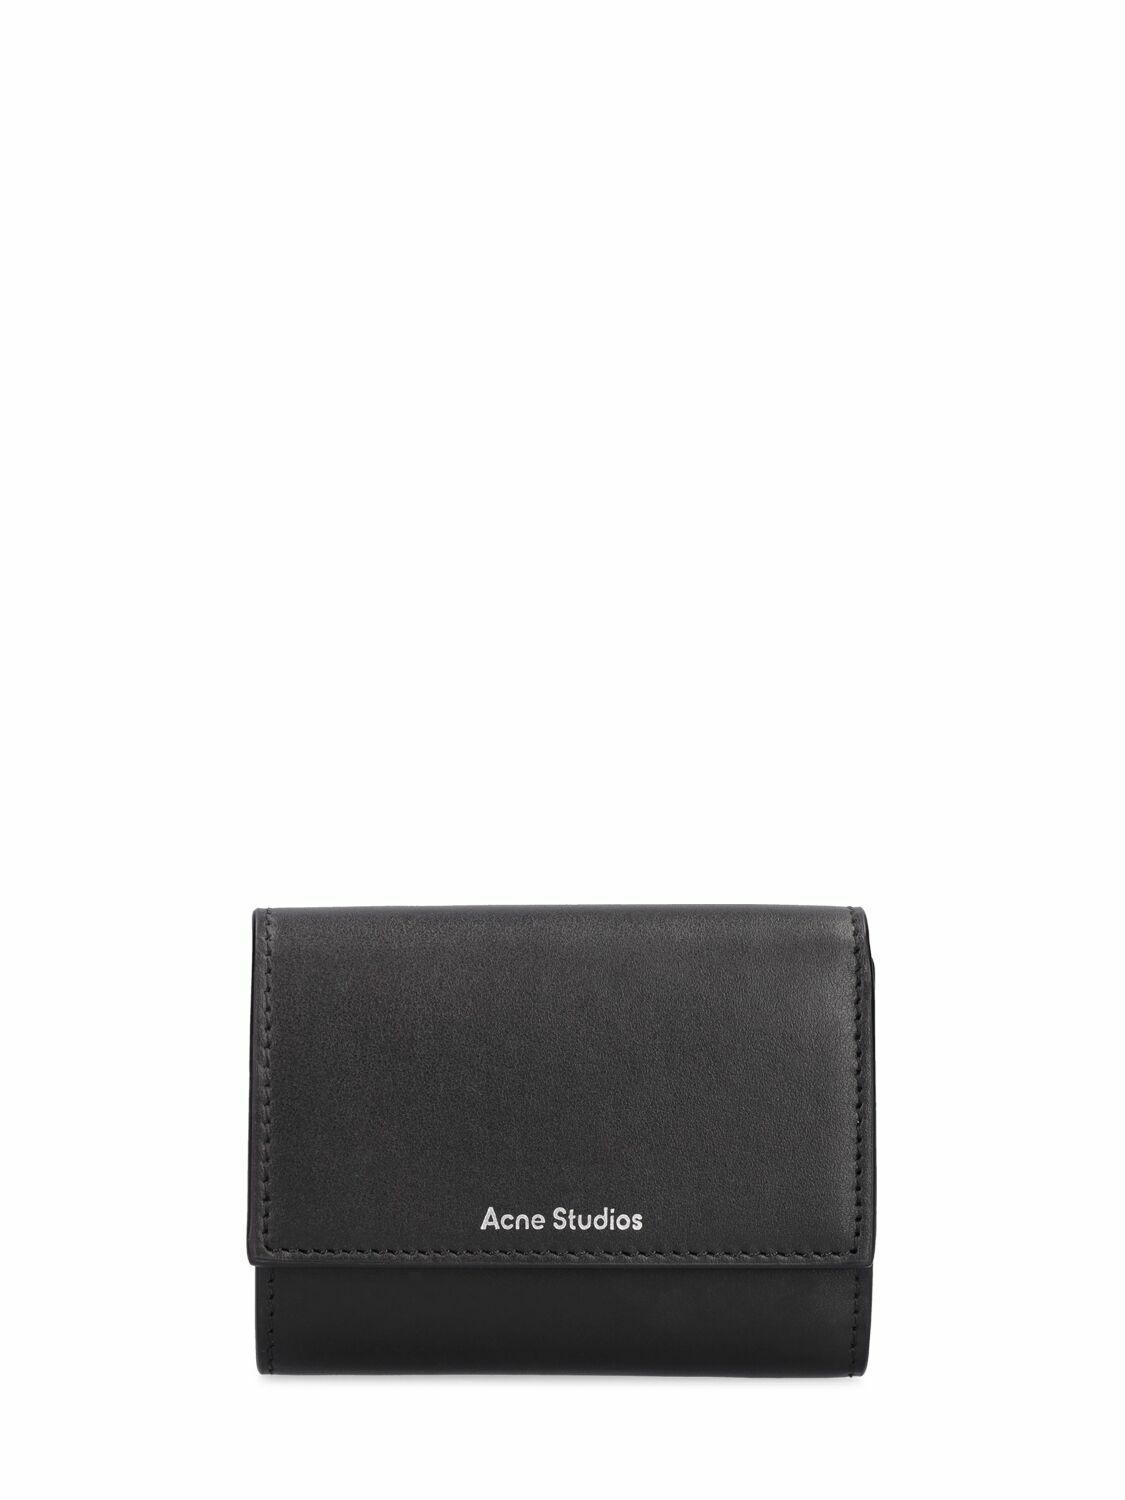 Photo: ACNE STUDIOS - Leather Trifold Wallet